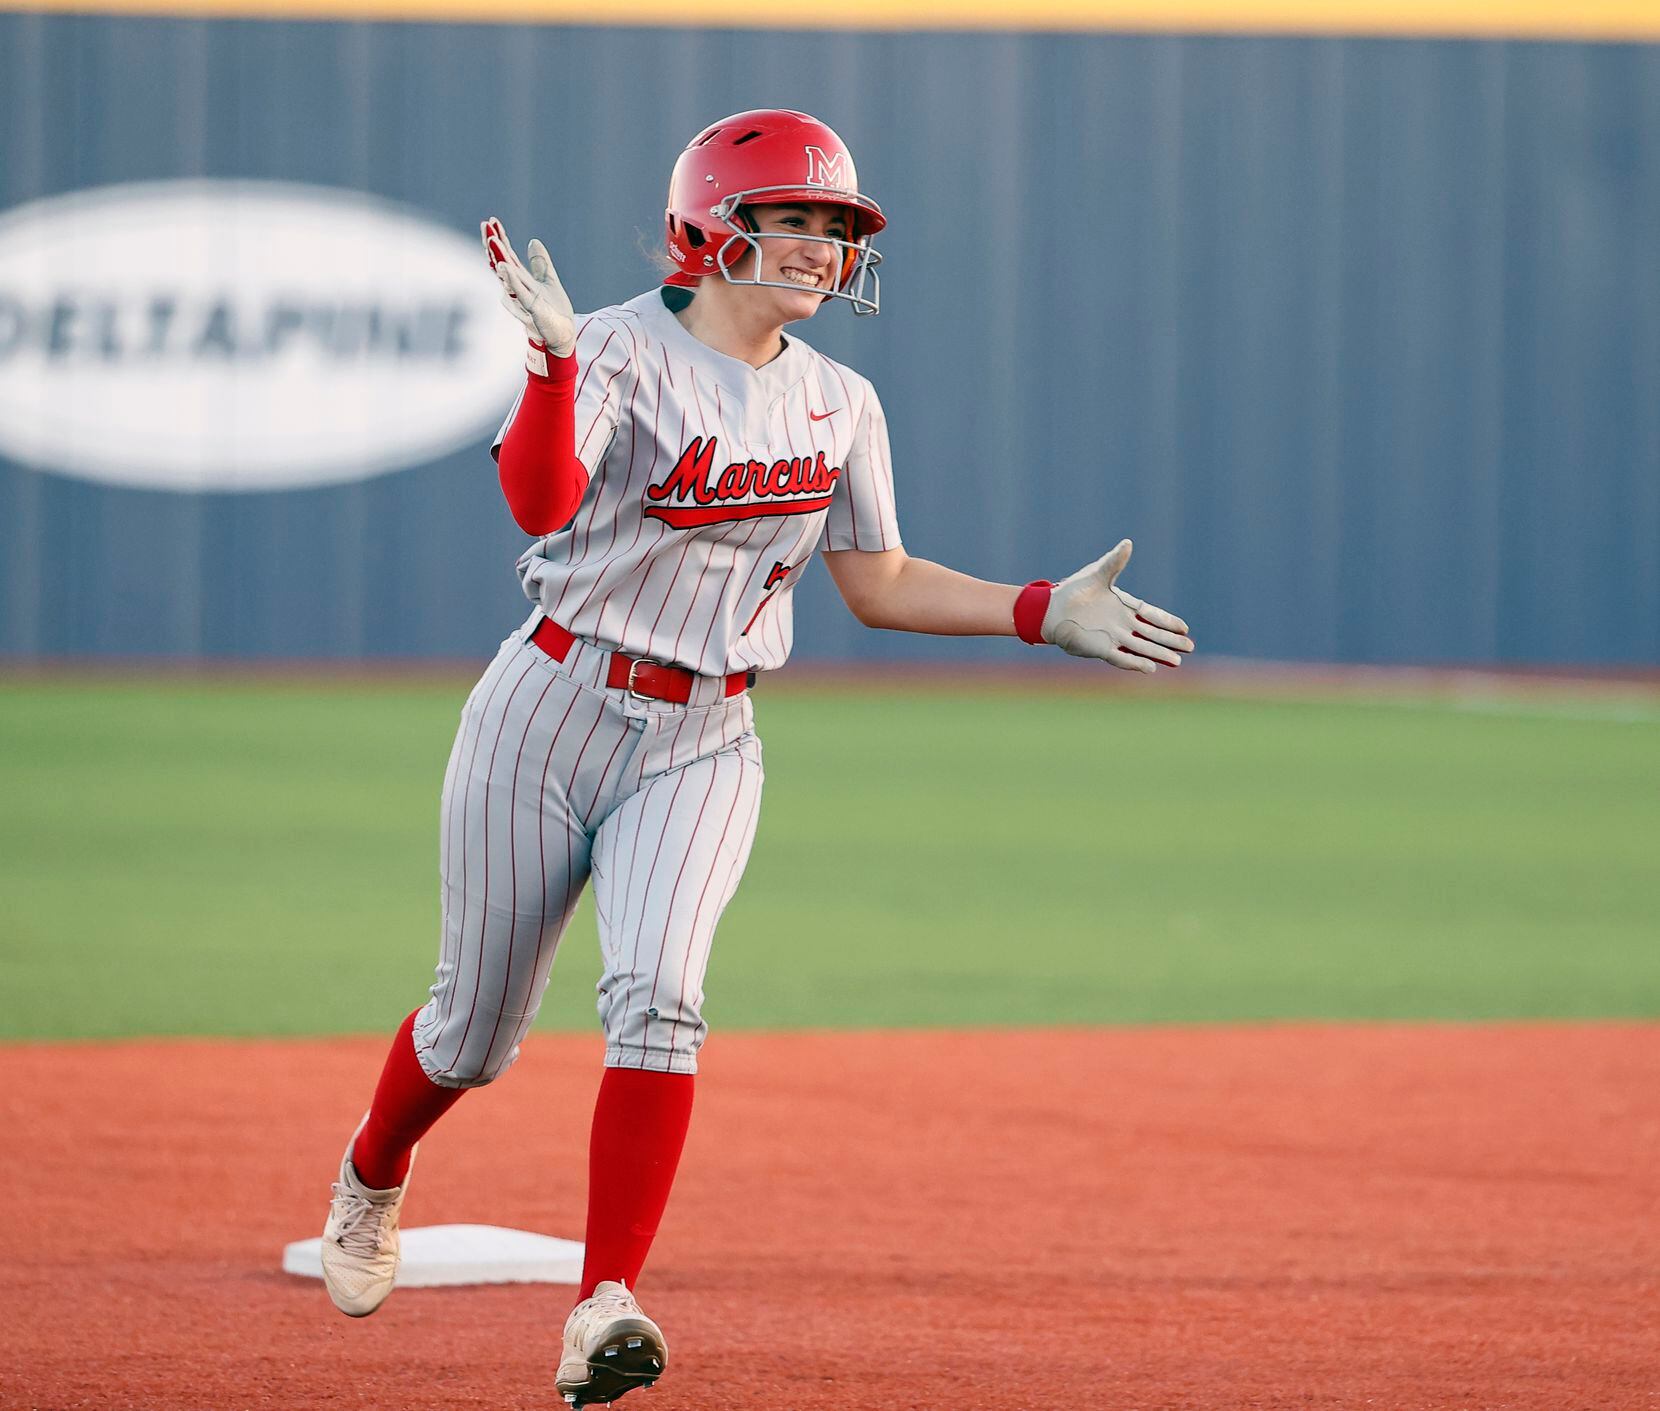 Flower Mound Marcus' Alexa Hanish (7) celebrates after hitting a home run during the game...